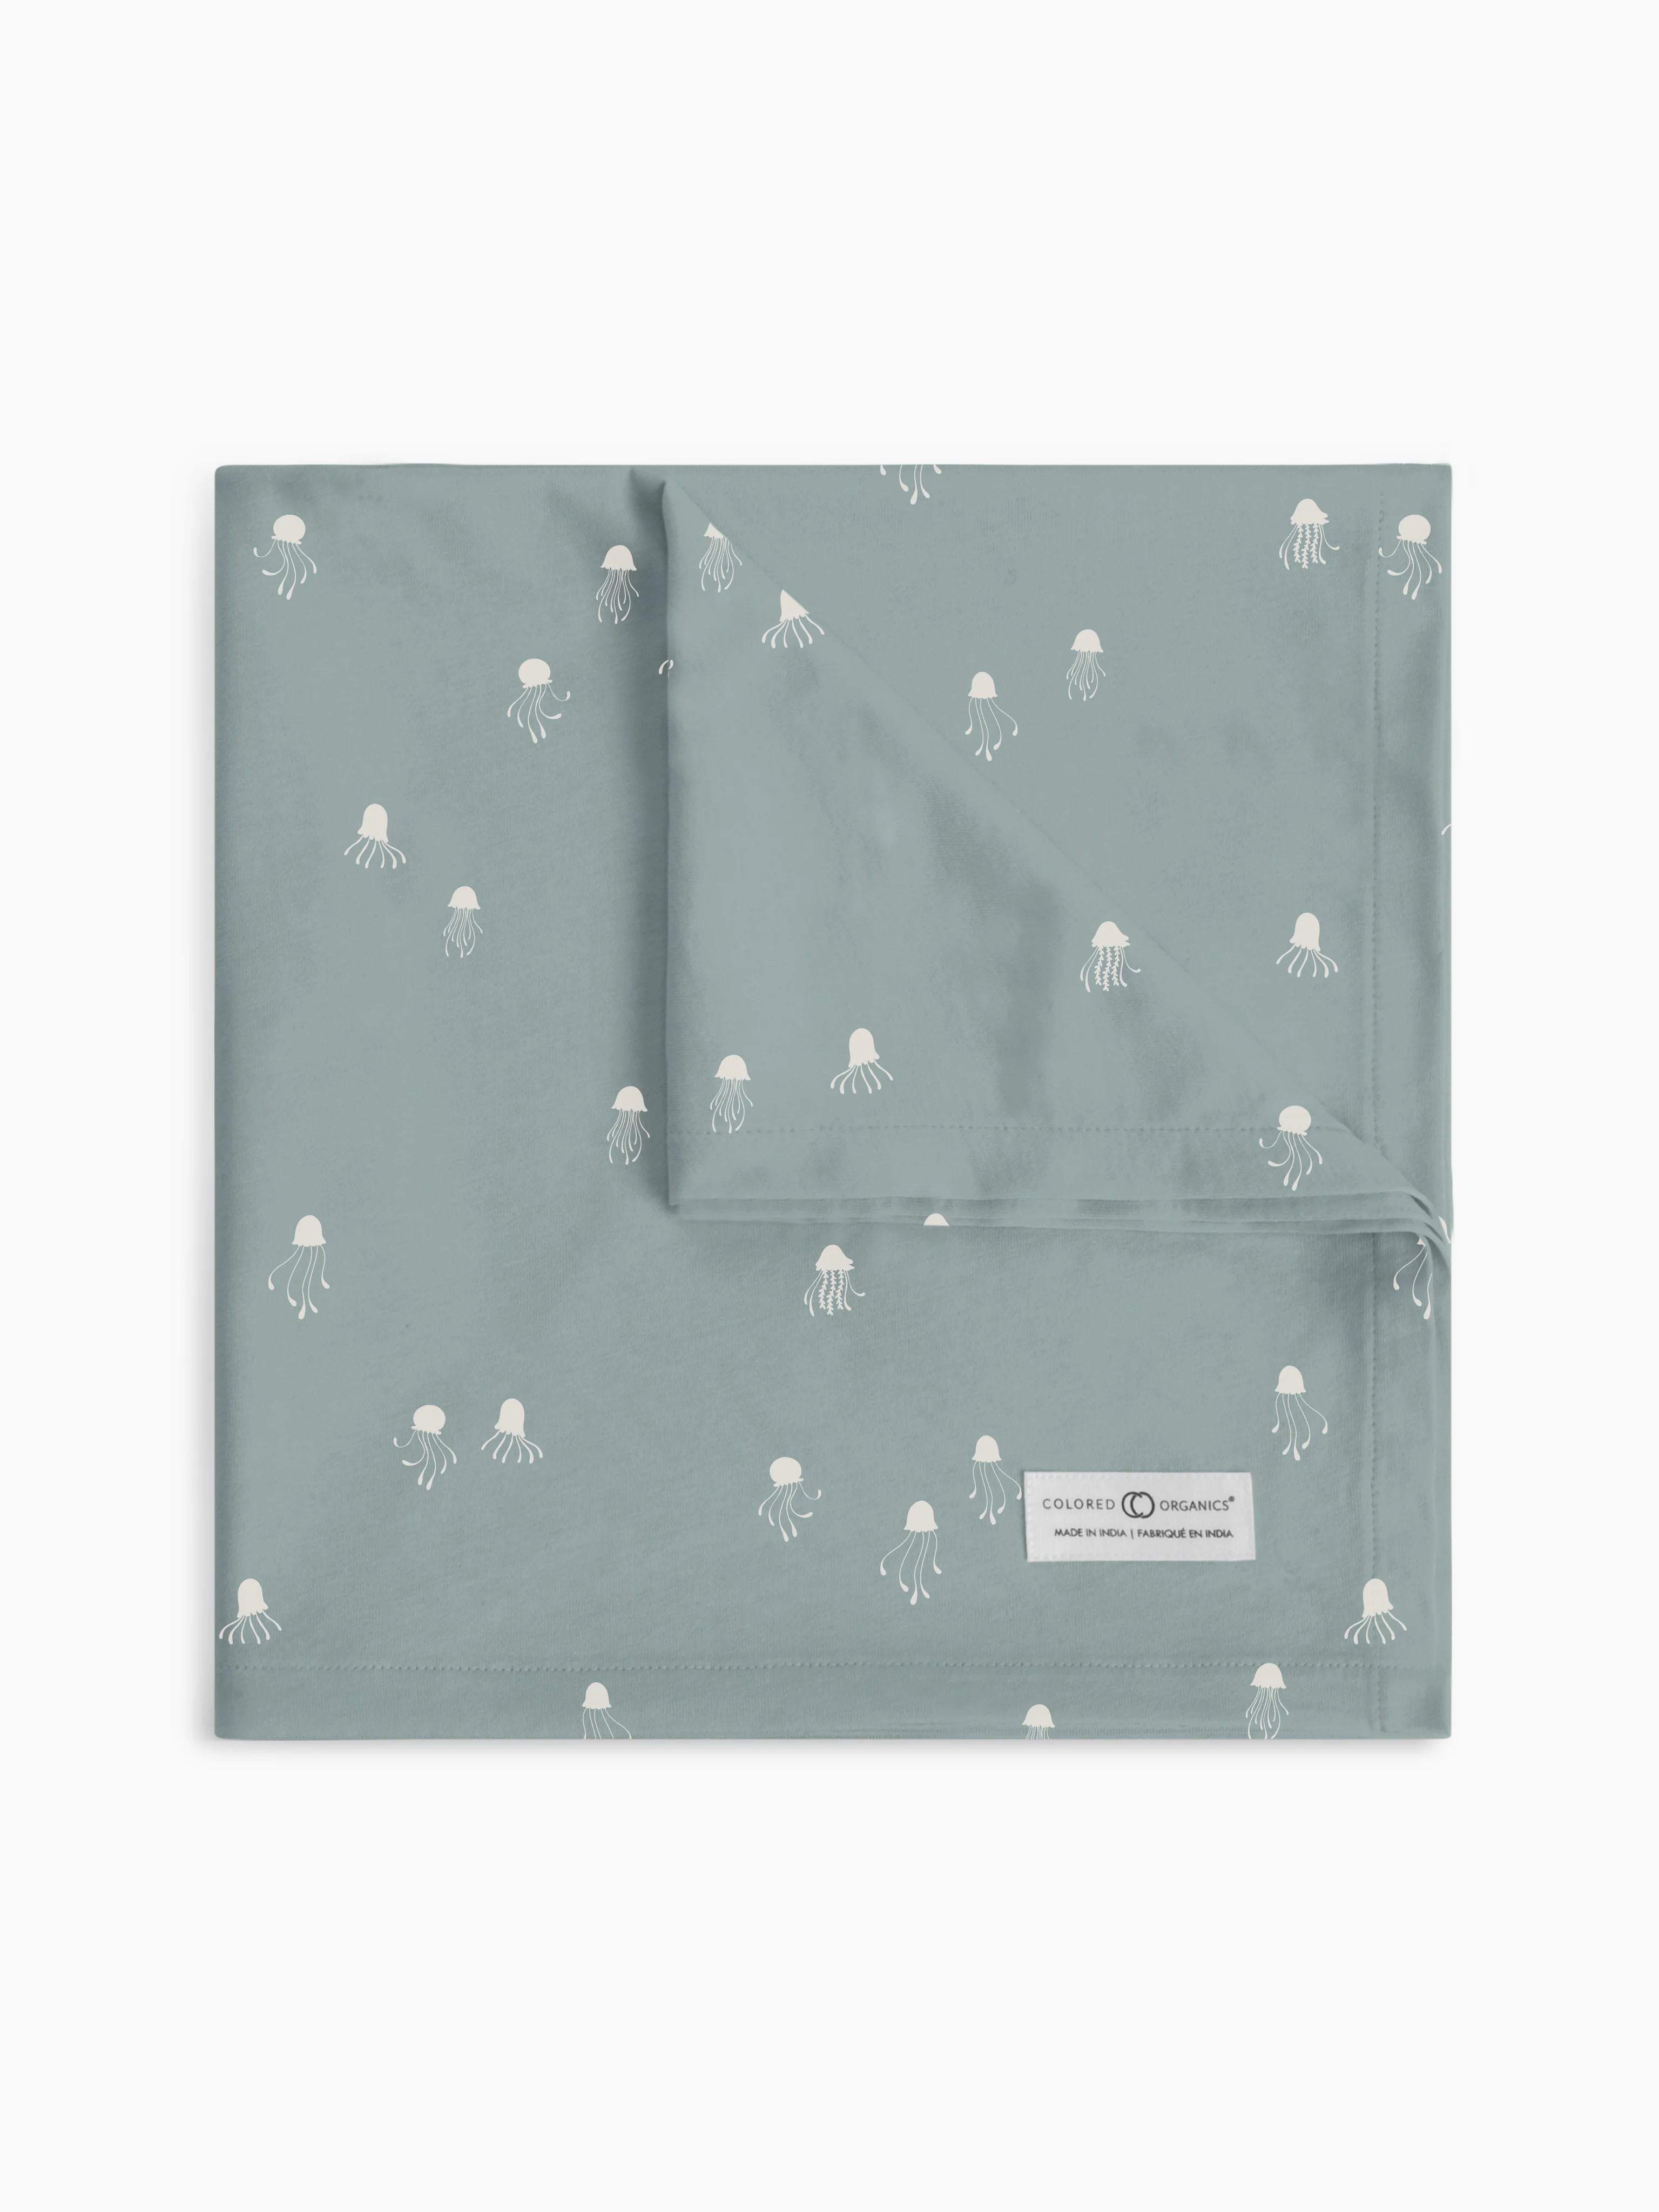 Colored Organics swaddle blanket in 'Jellyfish - Ocean' design, laid flat to show the serene jellyfish pattern on a soft grey background, with the brand's organic commitment label visible